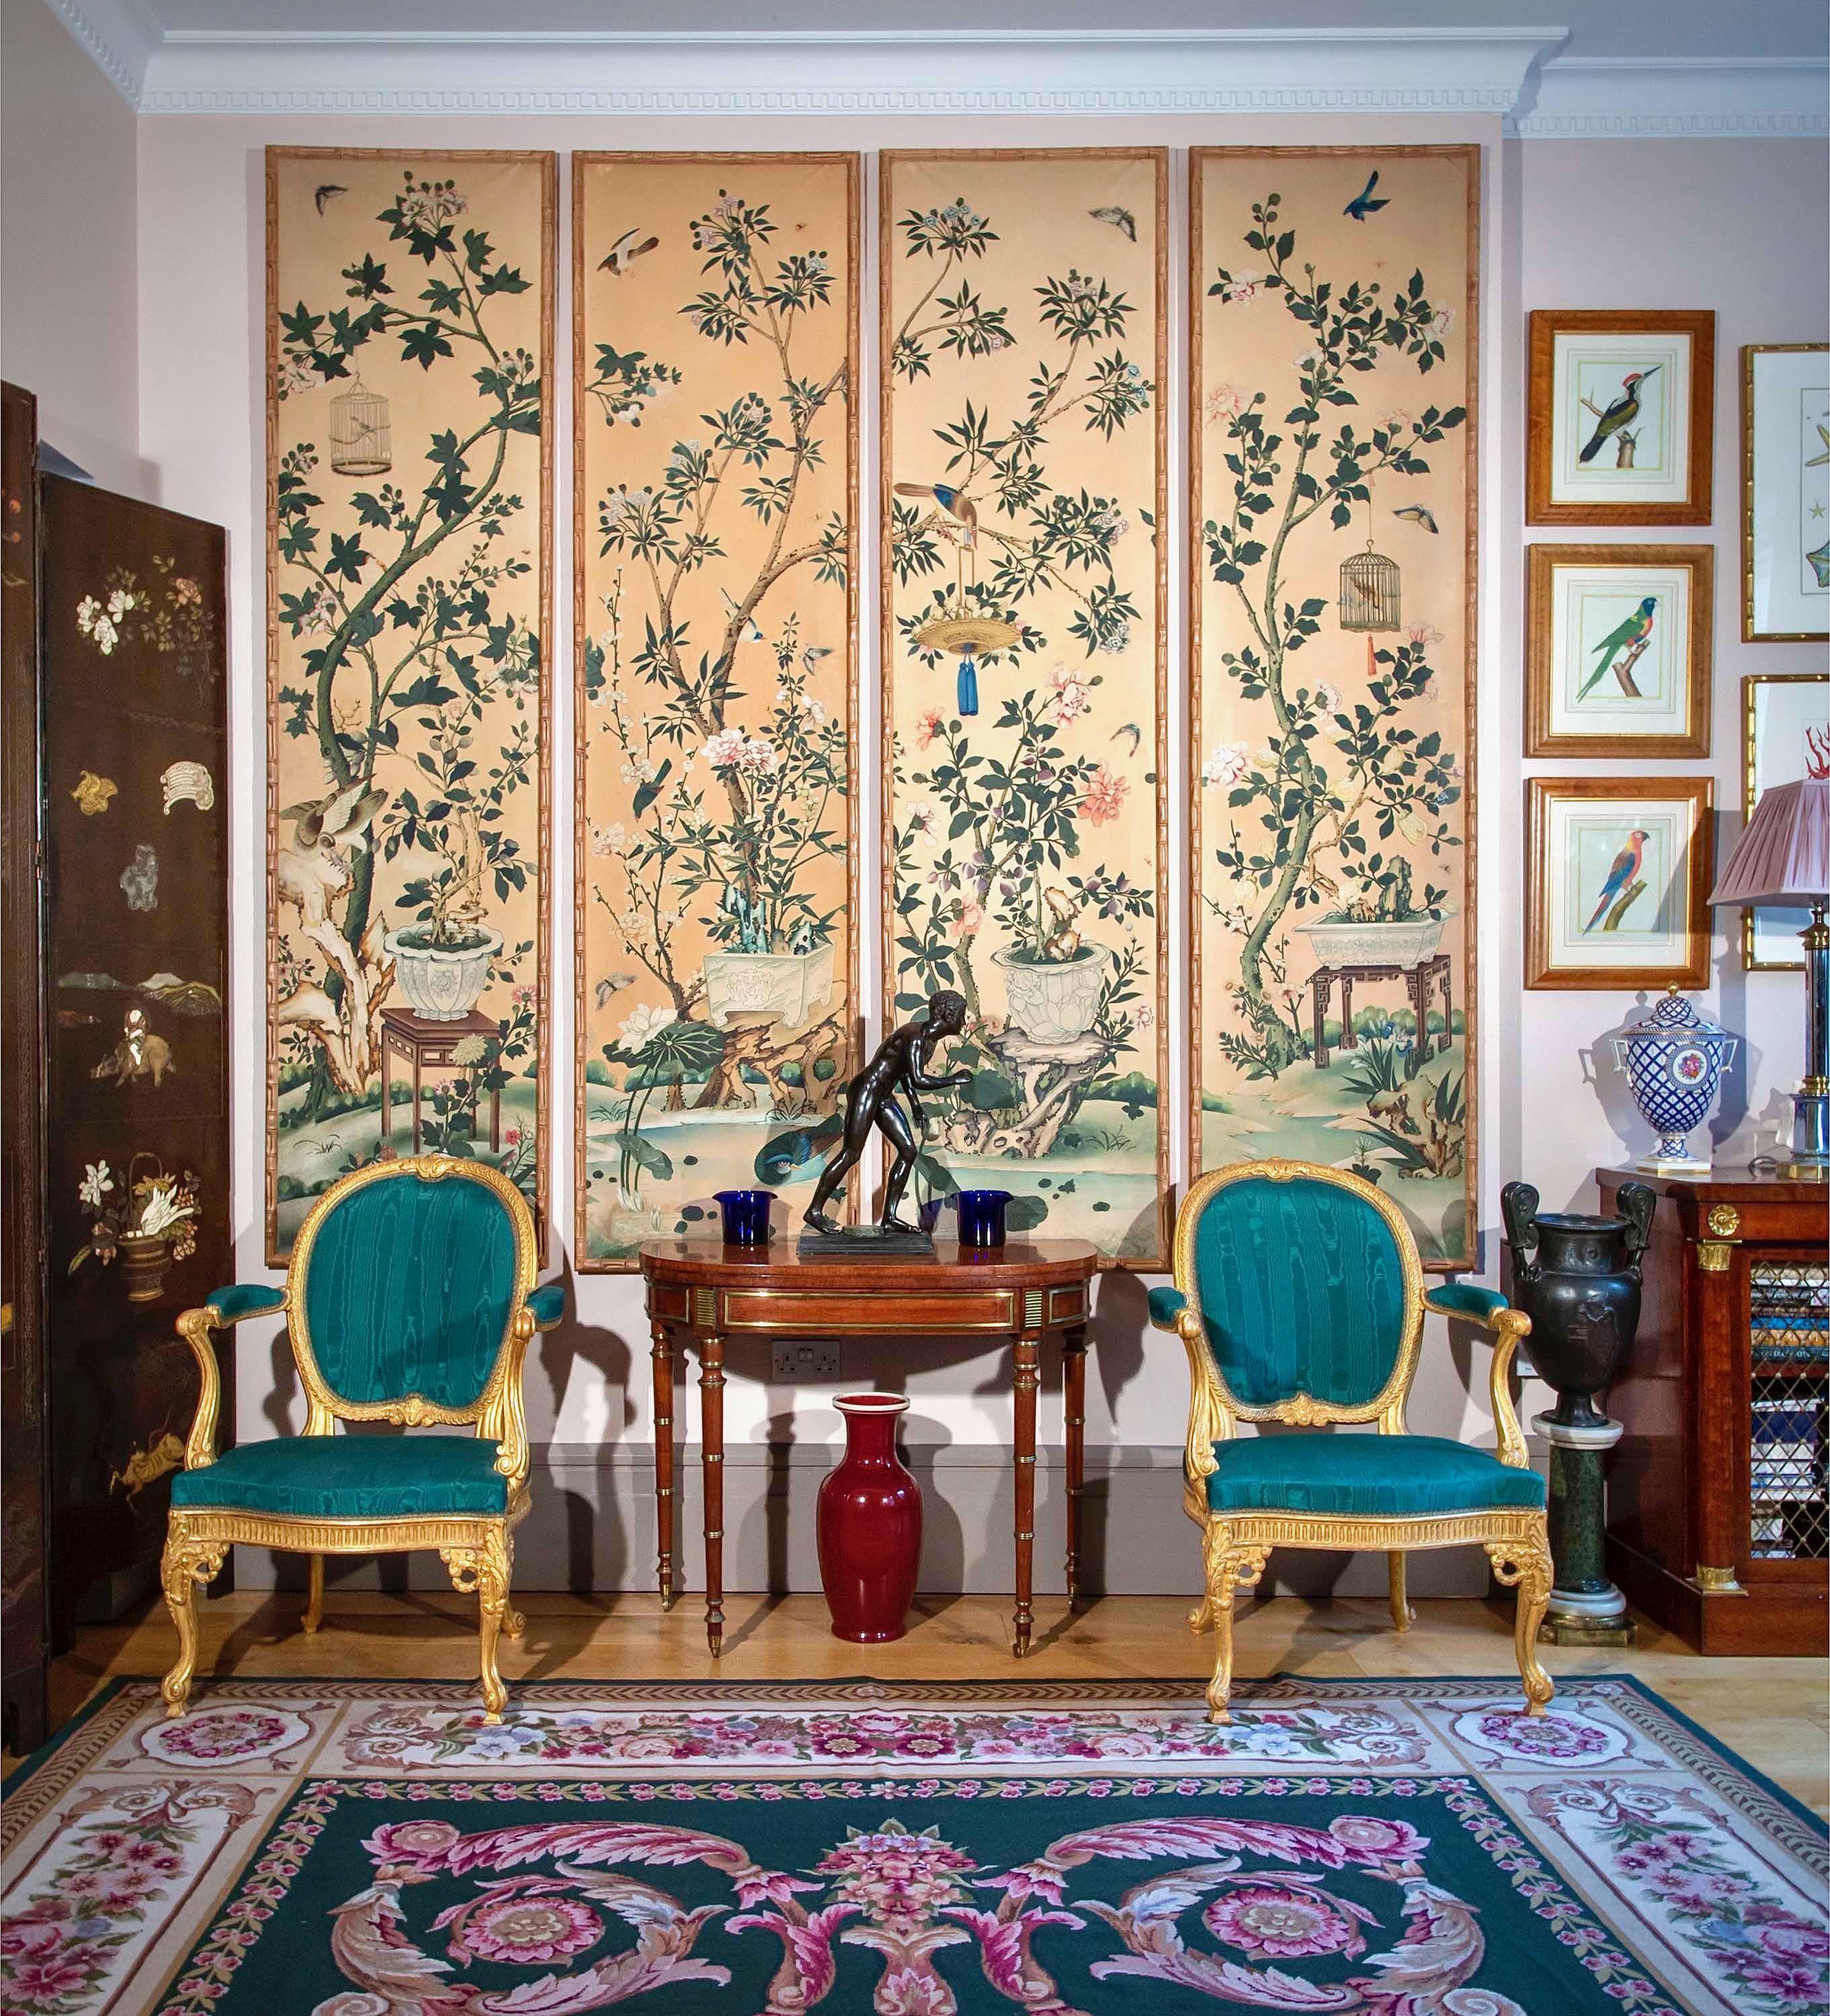 A superbly decorative and rare set of four Chinoiserie wallpaper panels, exquisitely hand-painted with exotic birds and butterflies in the garden, on a pale pink background. Each panel is beautifully framed in a simulated bamboo frame.

China,